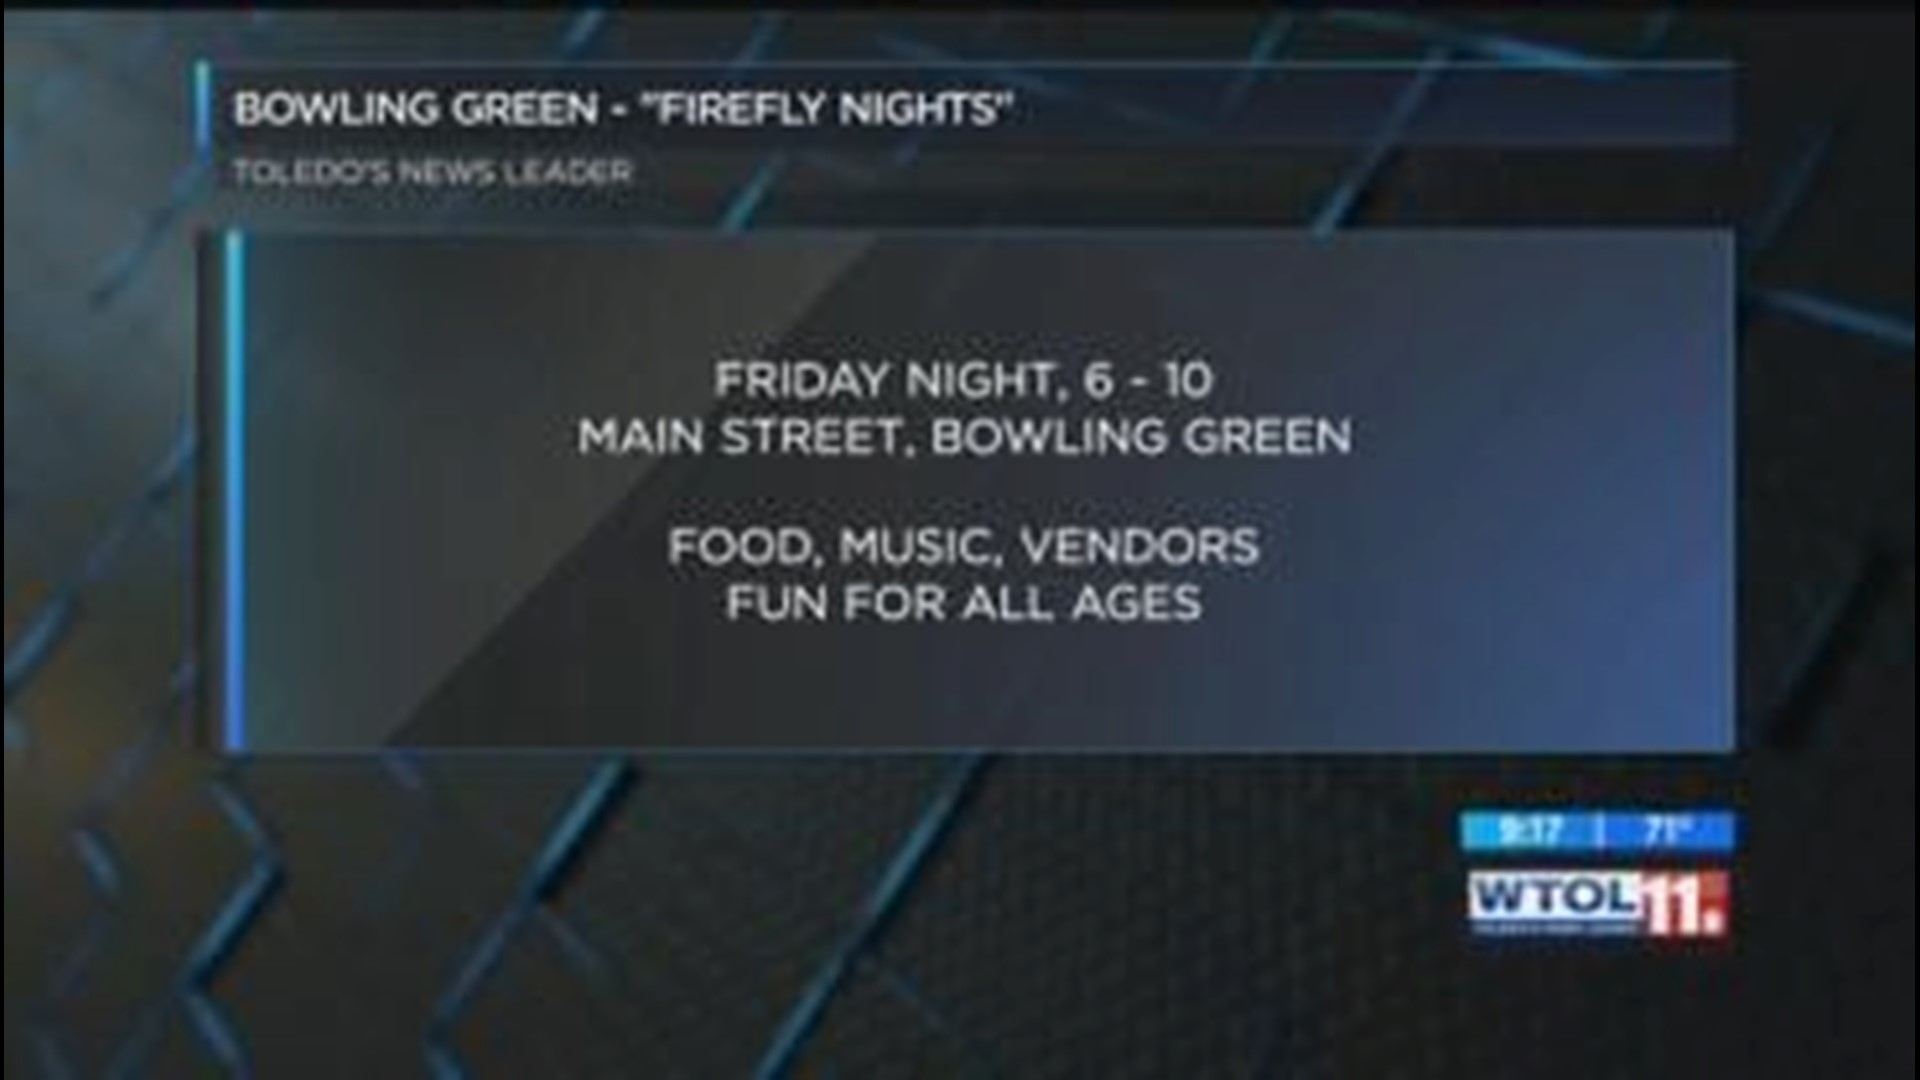 Welcome fireflies back to town with Firefly Nights in Bowling Green